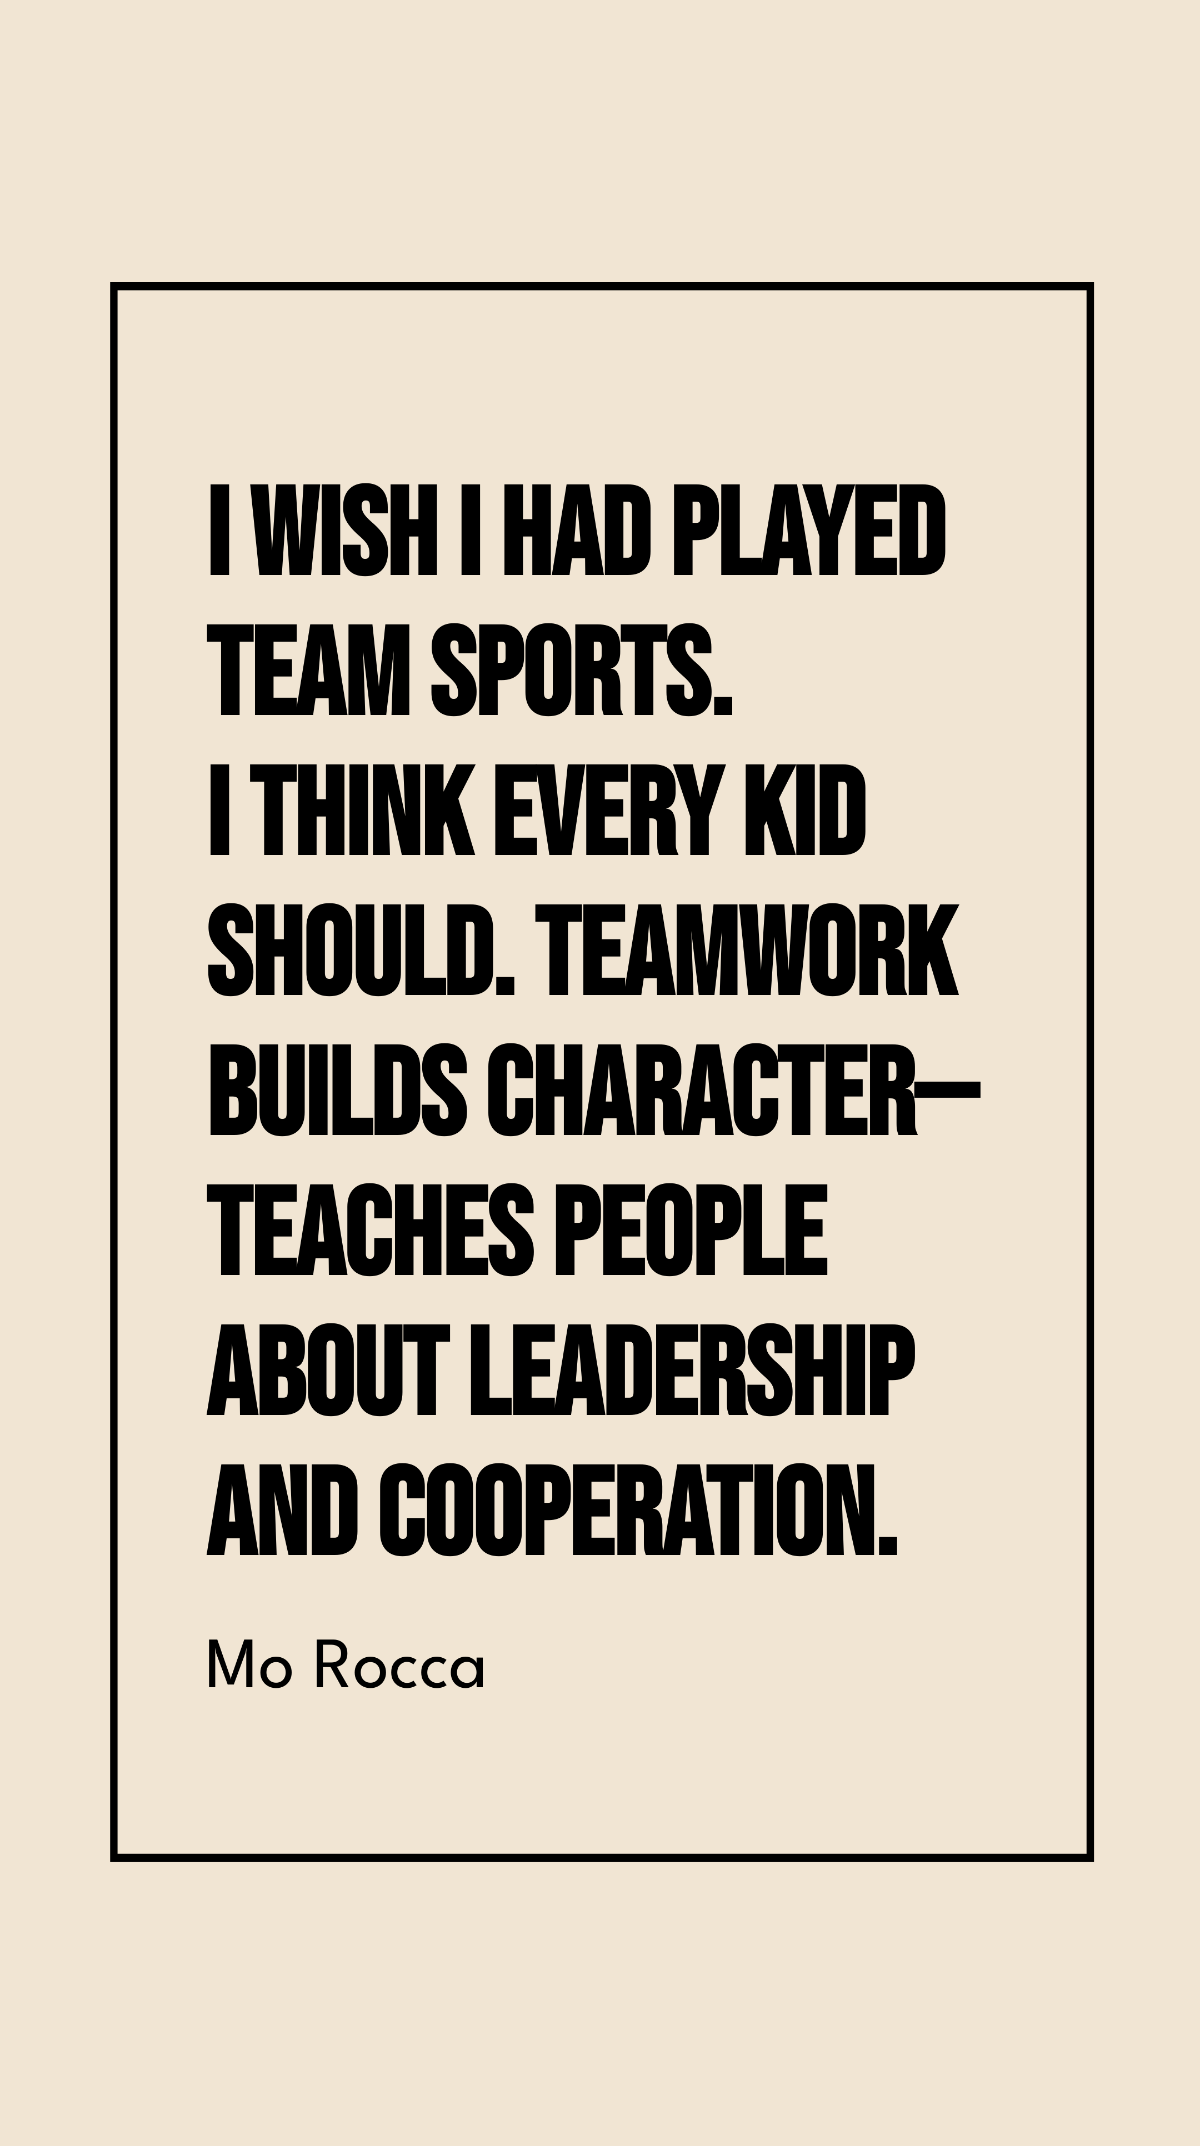 Free Mo Rocca - I wish I had played team sports. I think every kid should. Teamwork builds character - teaches people about leadership and cooperation. Template